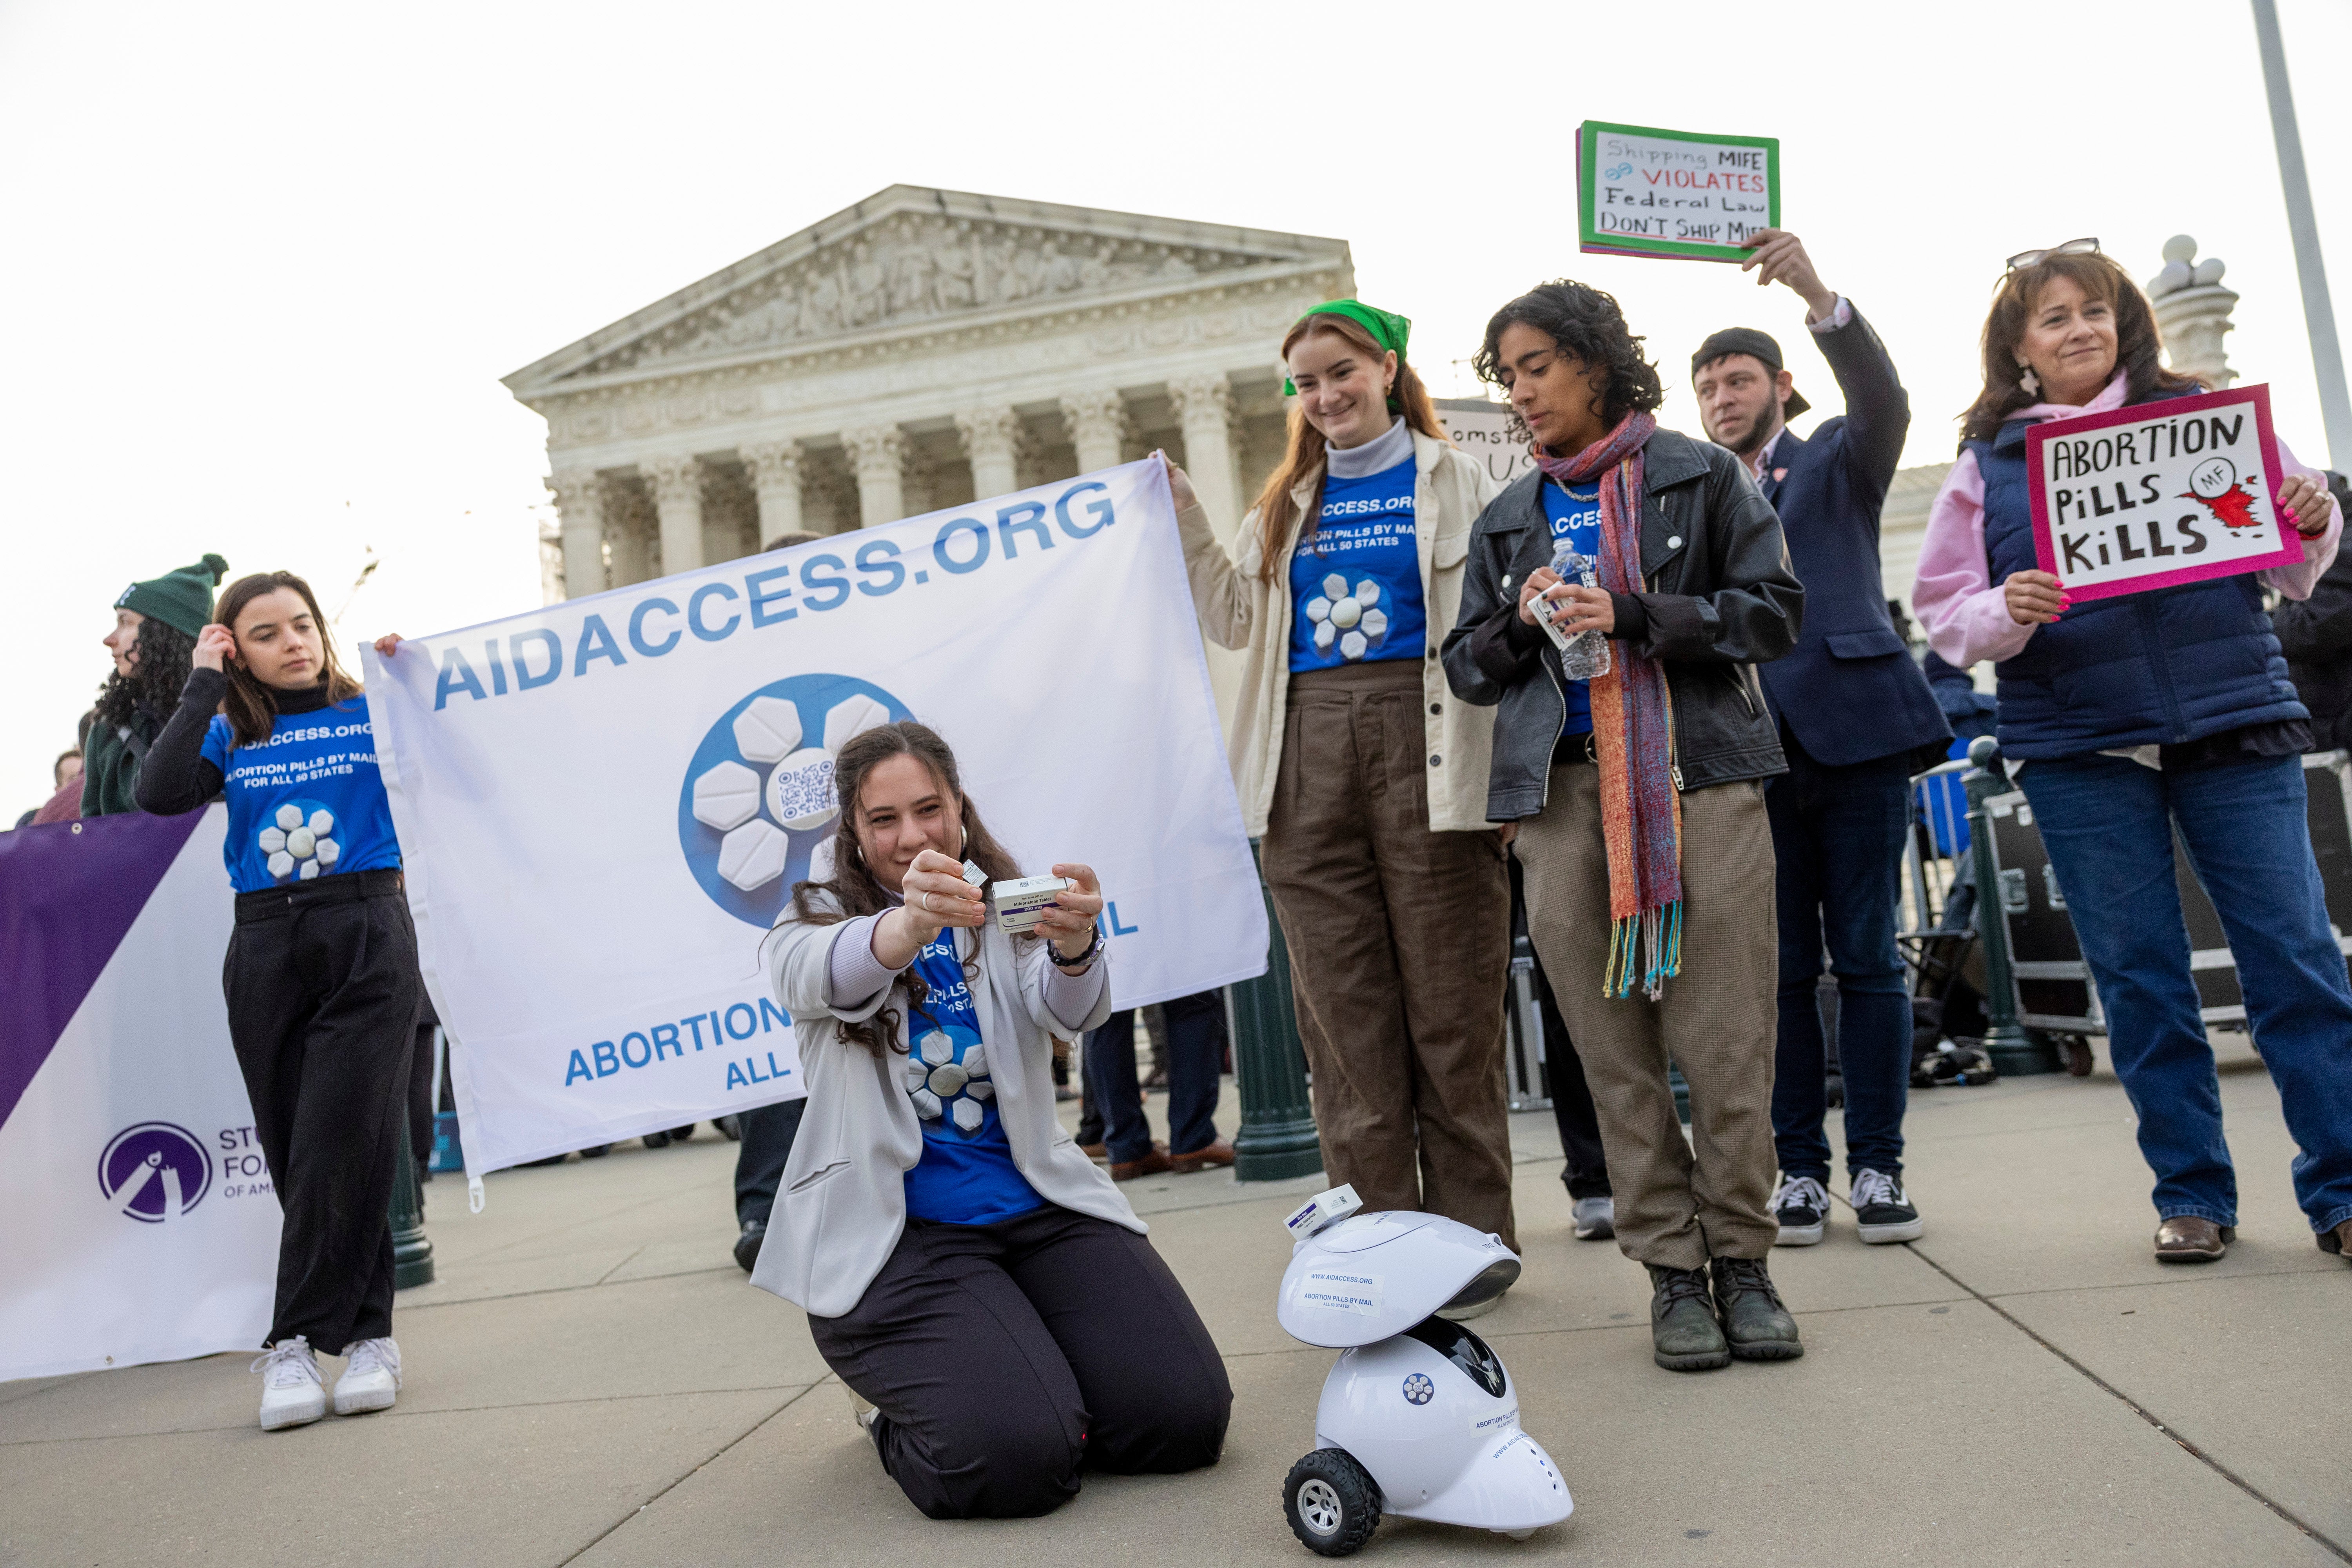 Mira Michels of Aid Access prepares to take the mifepristone pill in protest outside the US Supreme Court on 26 March.